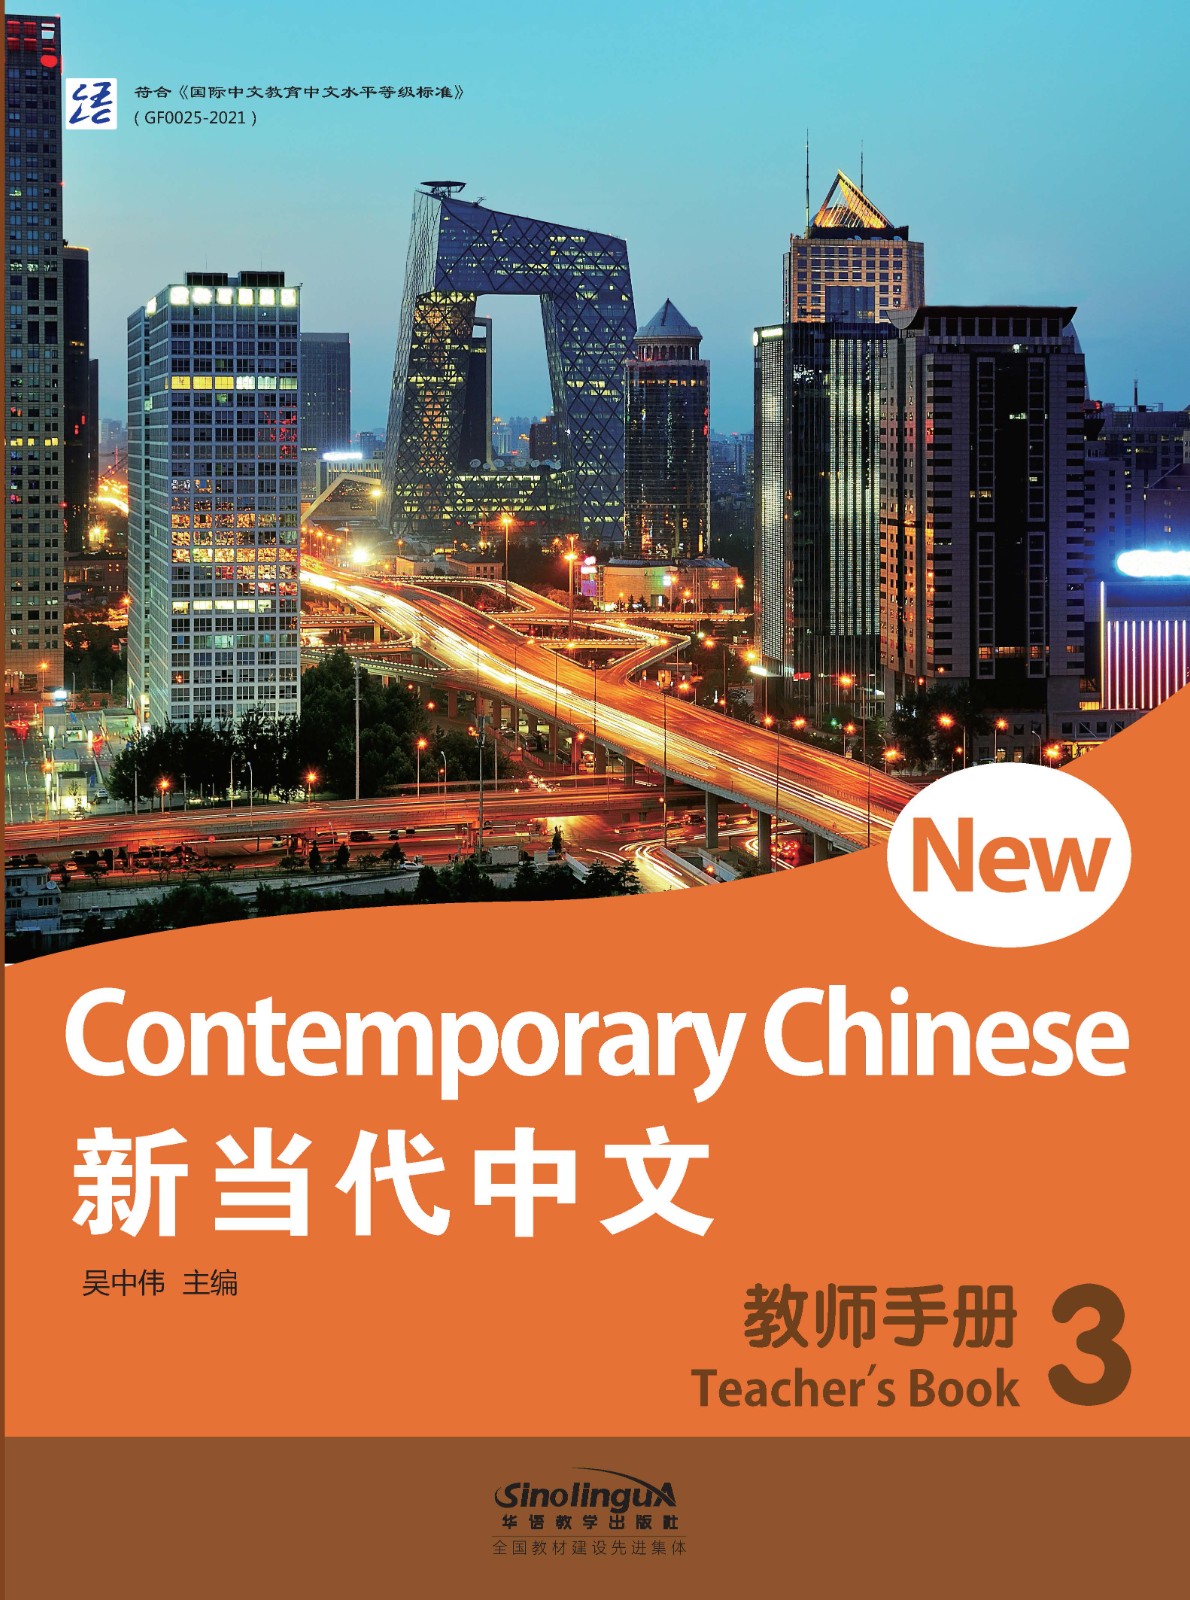 New Contemporary Chinese--Teacher's Book 3